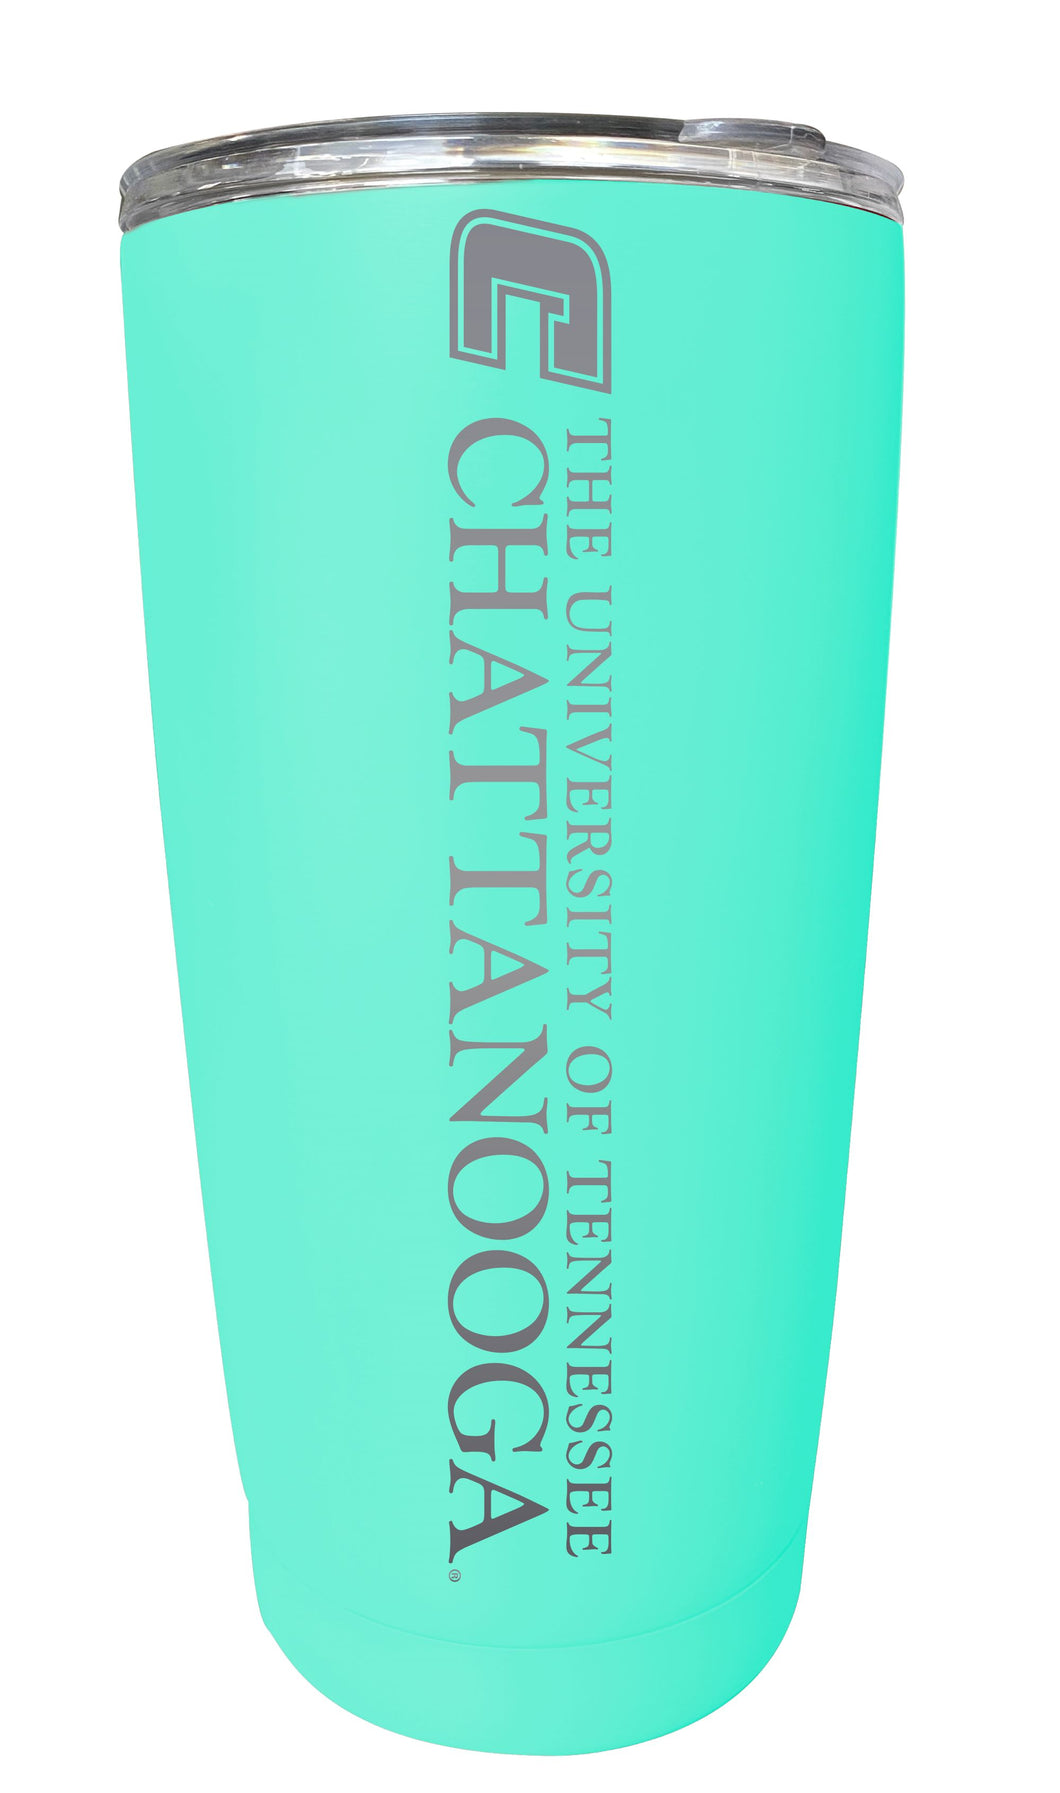 University of Tennessee at Chattanooga 16 oz Stainless Steel Etched Tumbler - Choose Your Color